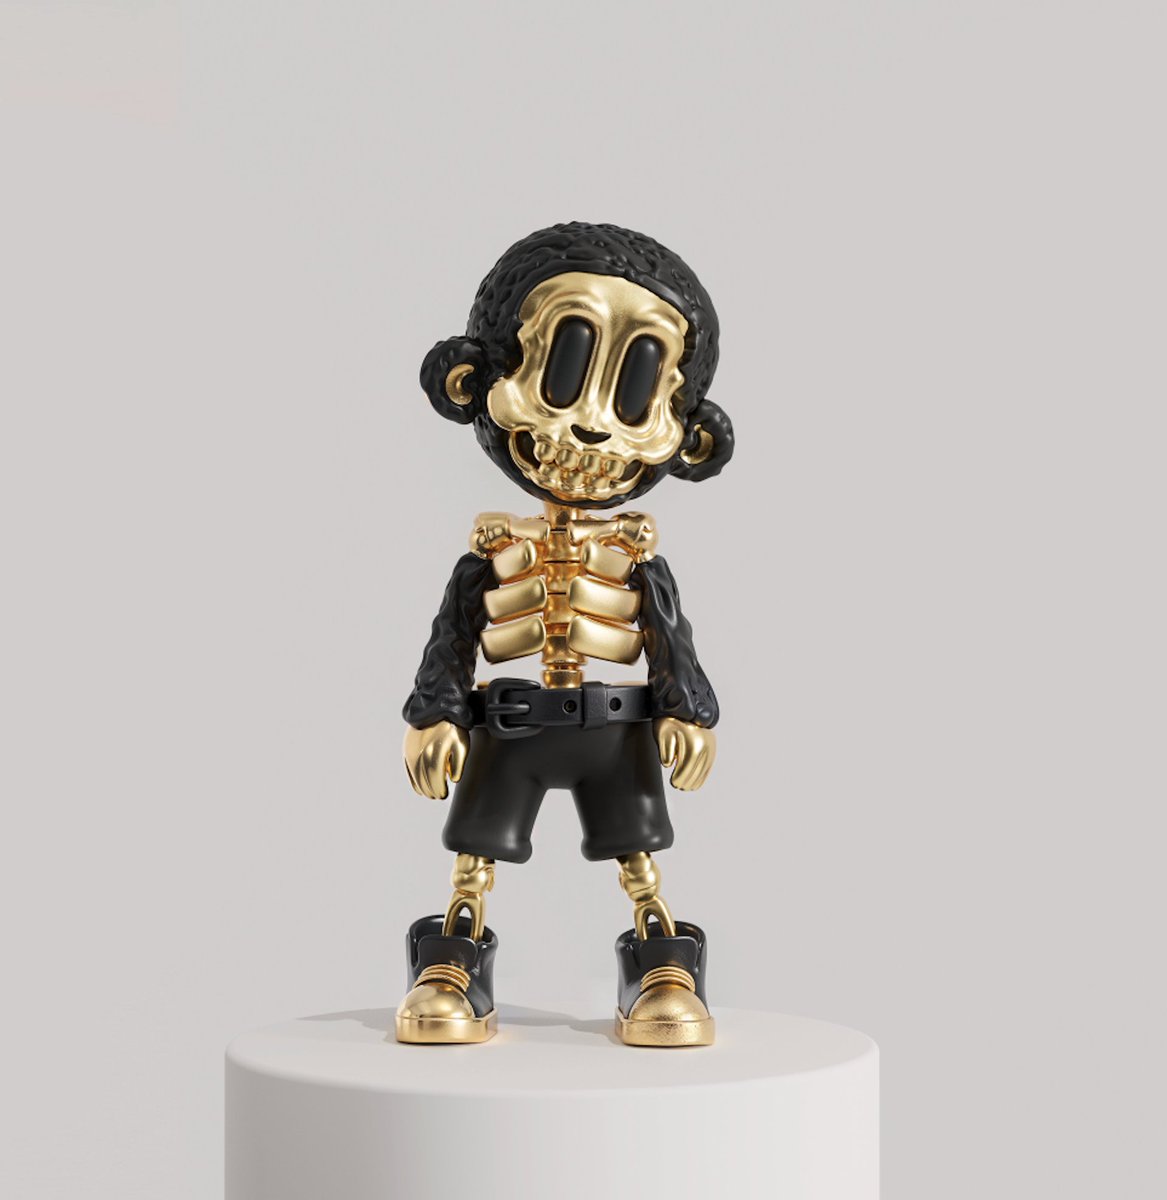 Airdrops for these little fellas being worked on 👀 How do you qualify for this limited edition figurine? It's simple: ➡️ Search Goons 3D on @MagicEden ➡️ Buy any listed 'Rare' (only a few left on market) 🪂 Wait for our airdrop + claim announcement!